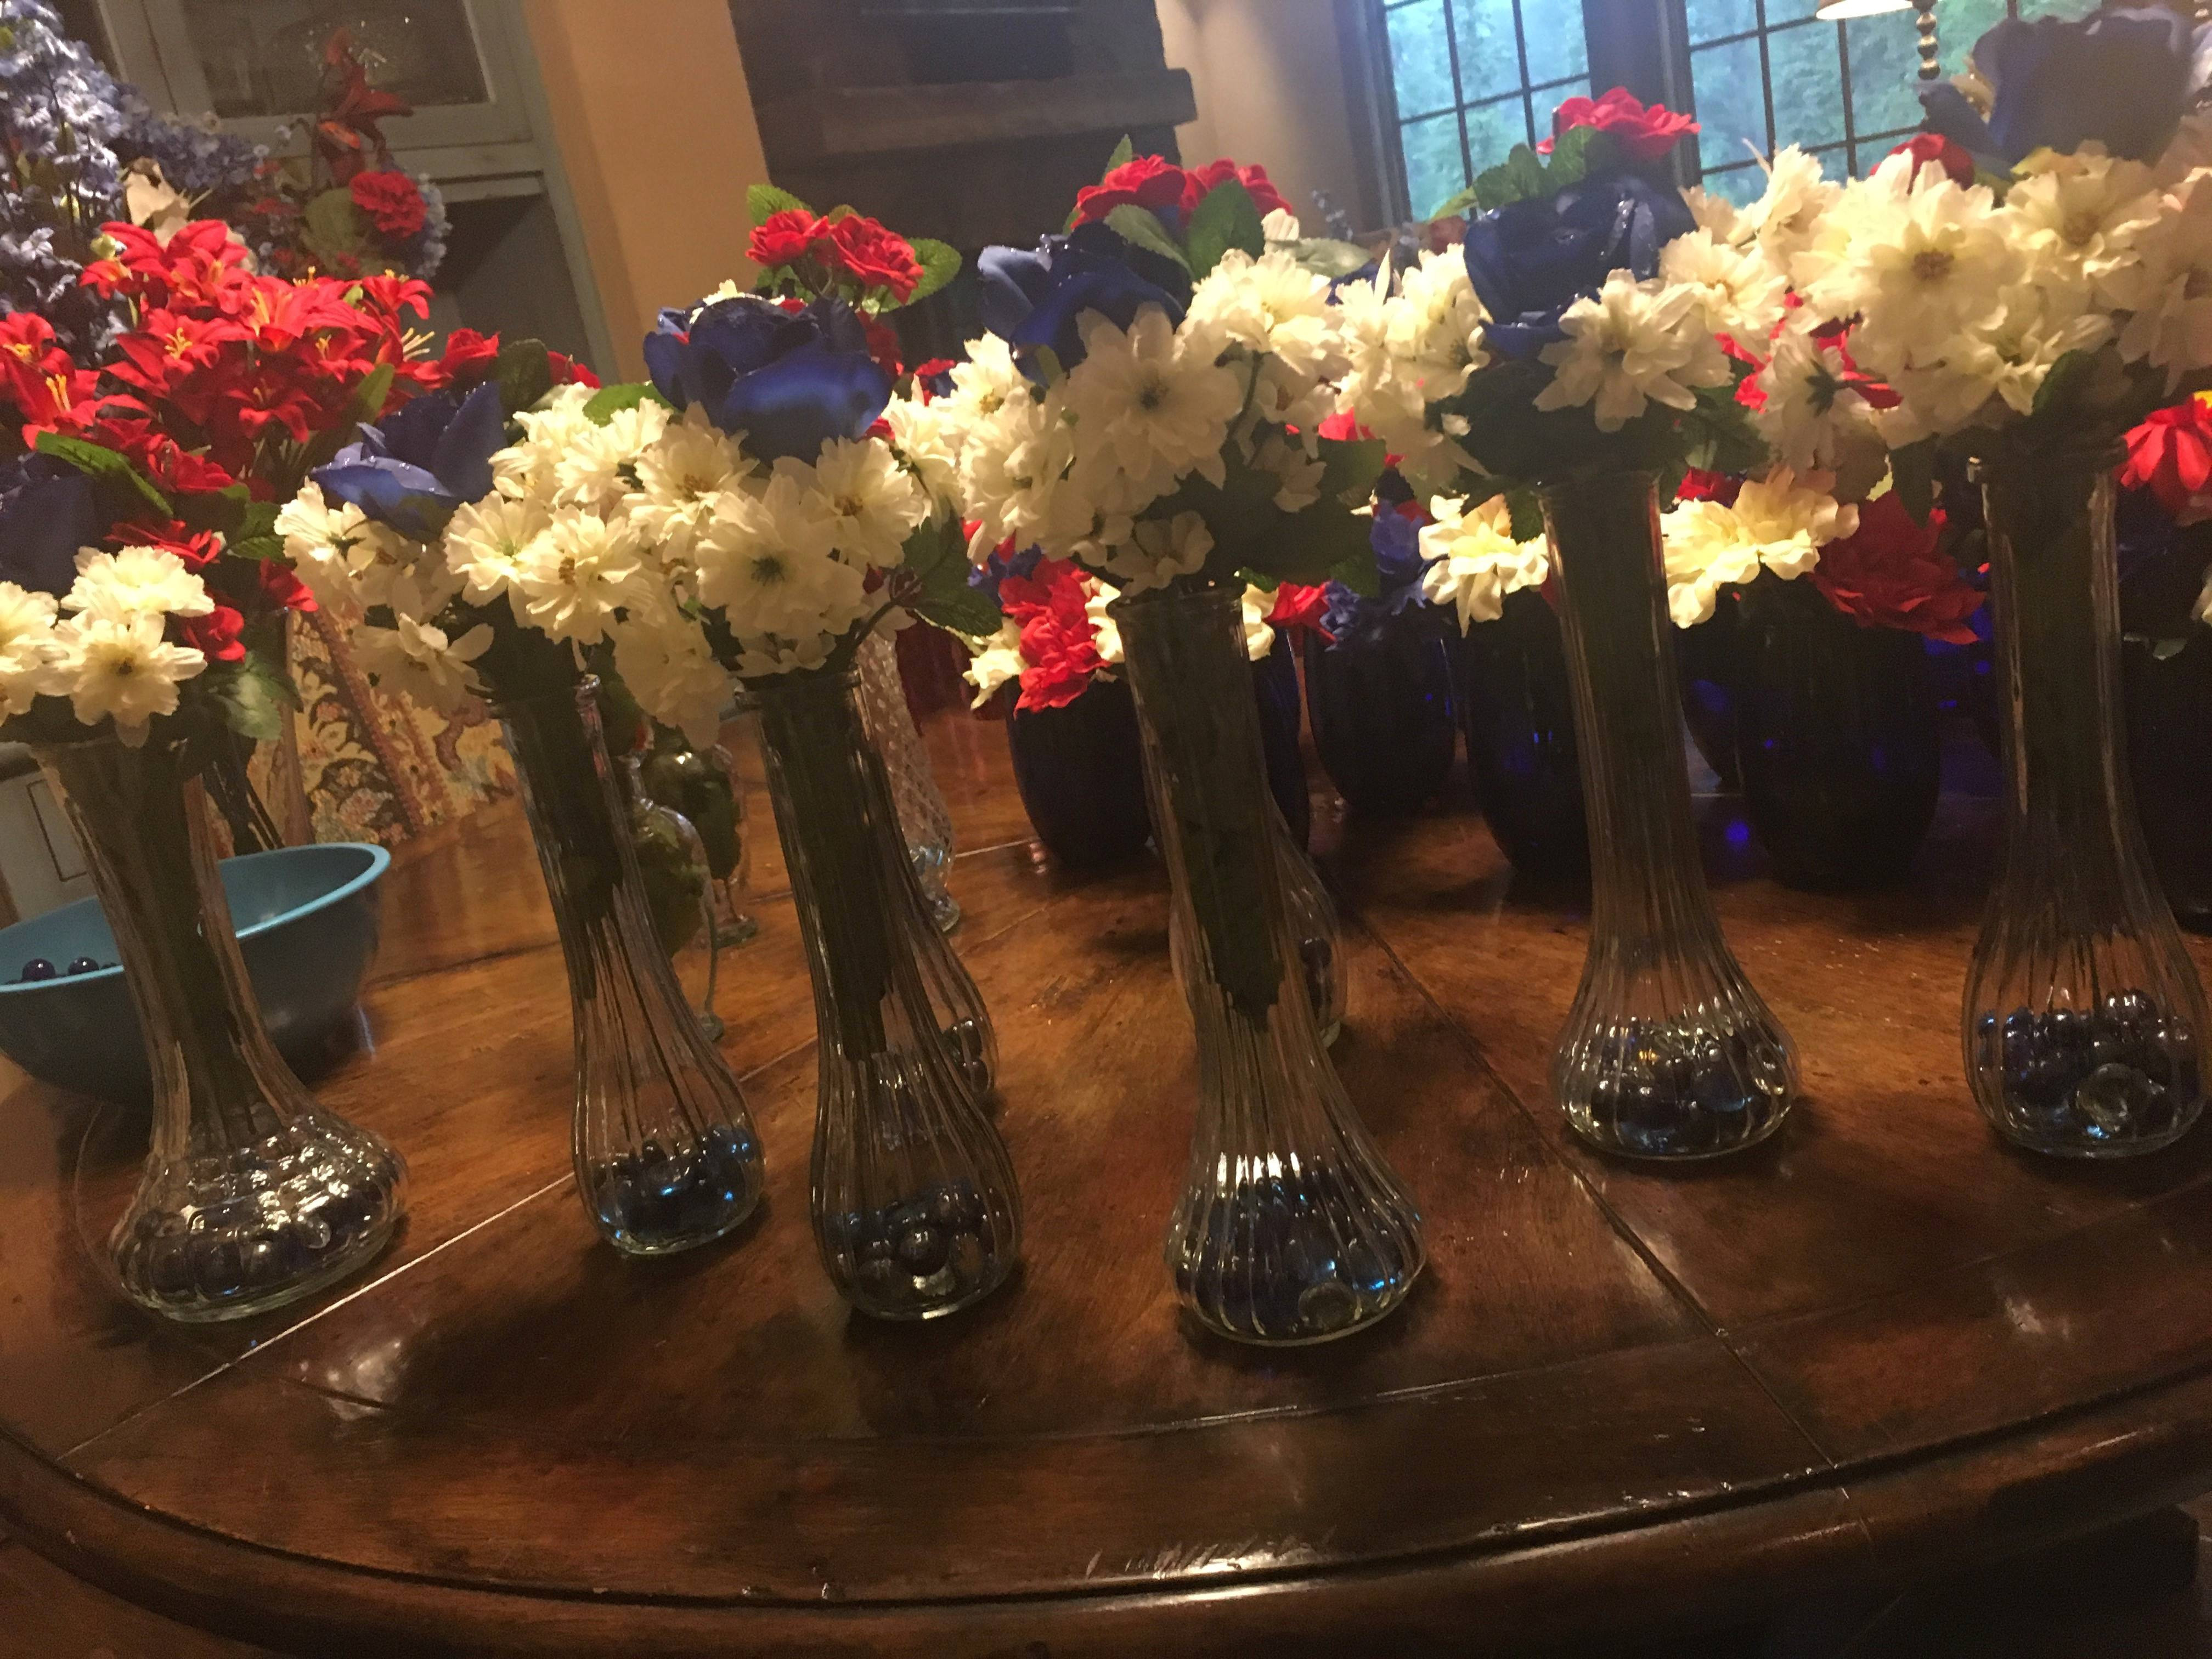 29 Nice French Country Decor Vases 2024 free download french country decor vases of country wedding decor ideas new dollar tree wedding decorations within country wedding decor ideas new dollar tree wedding decorations awesome h vases dollar va